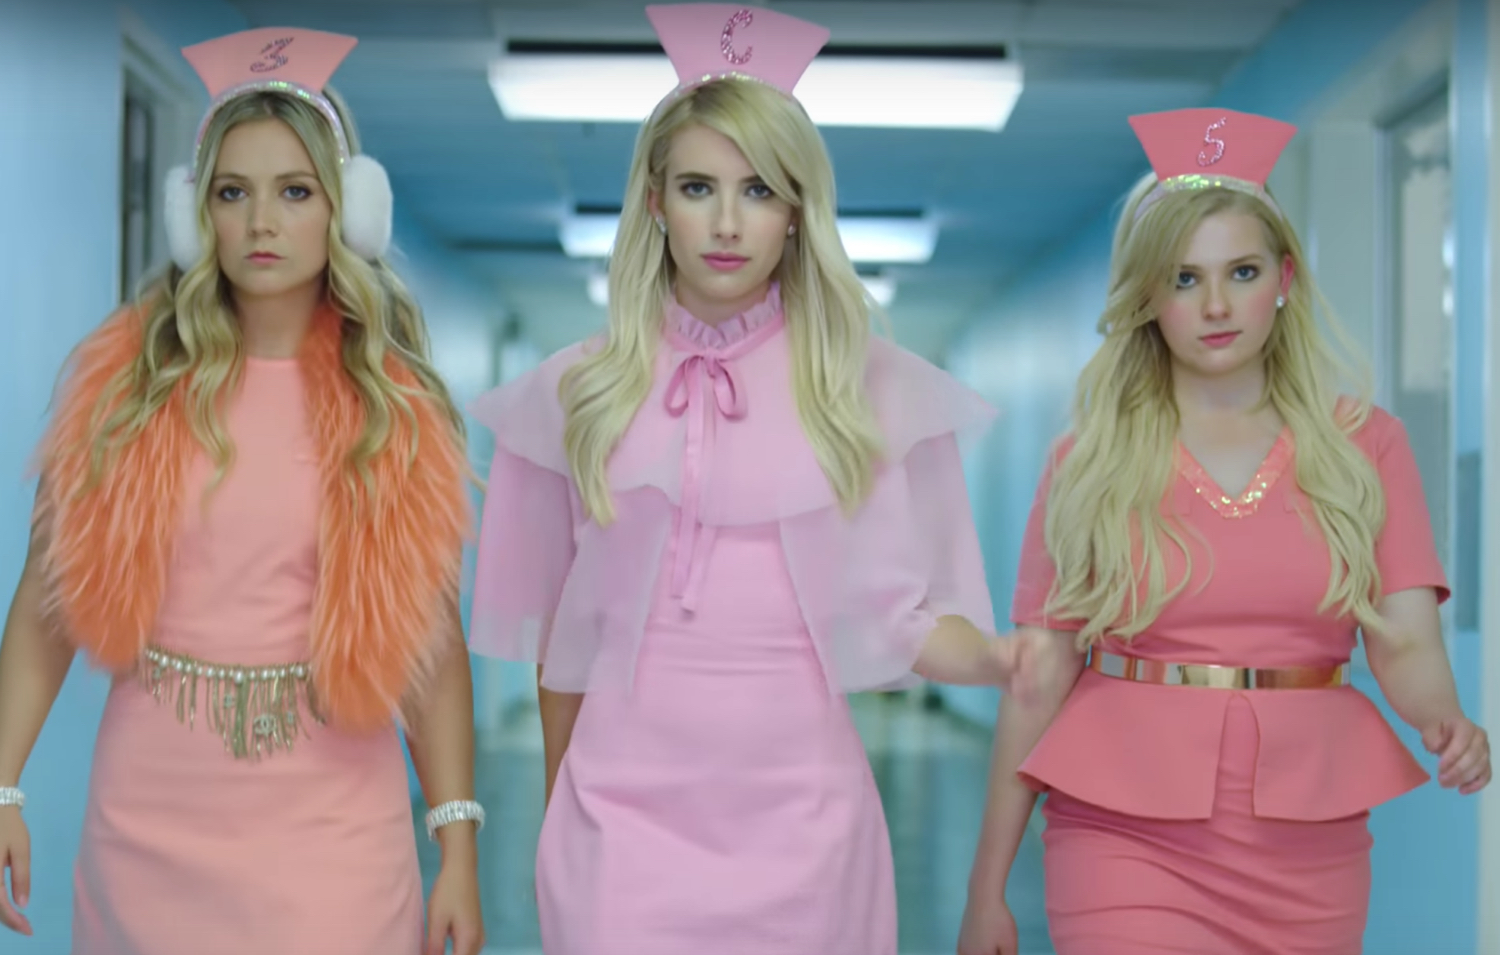 Scream Queens Season Teaser Trailer The Chanels Are Back Video